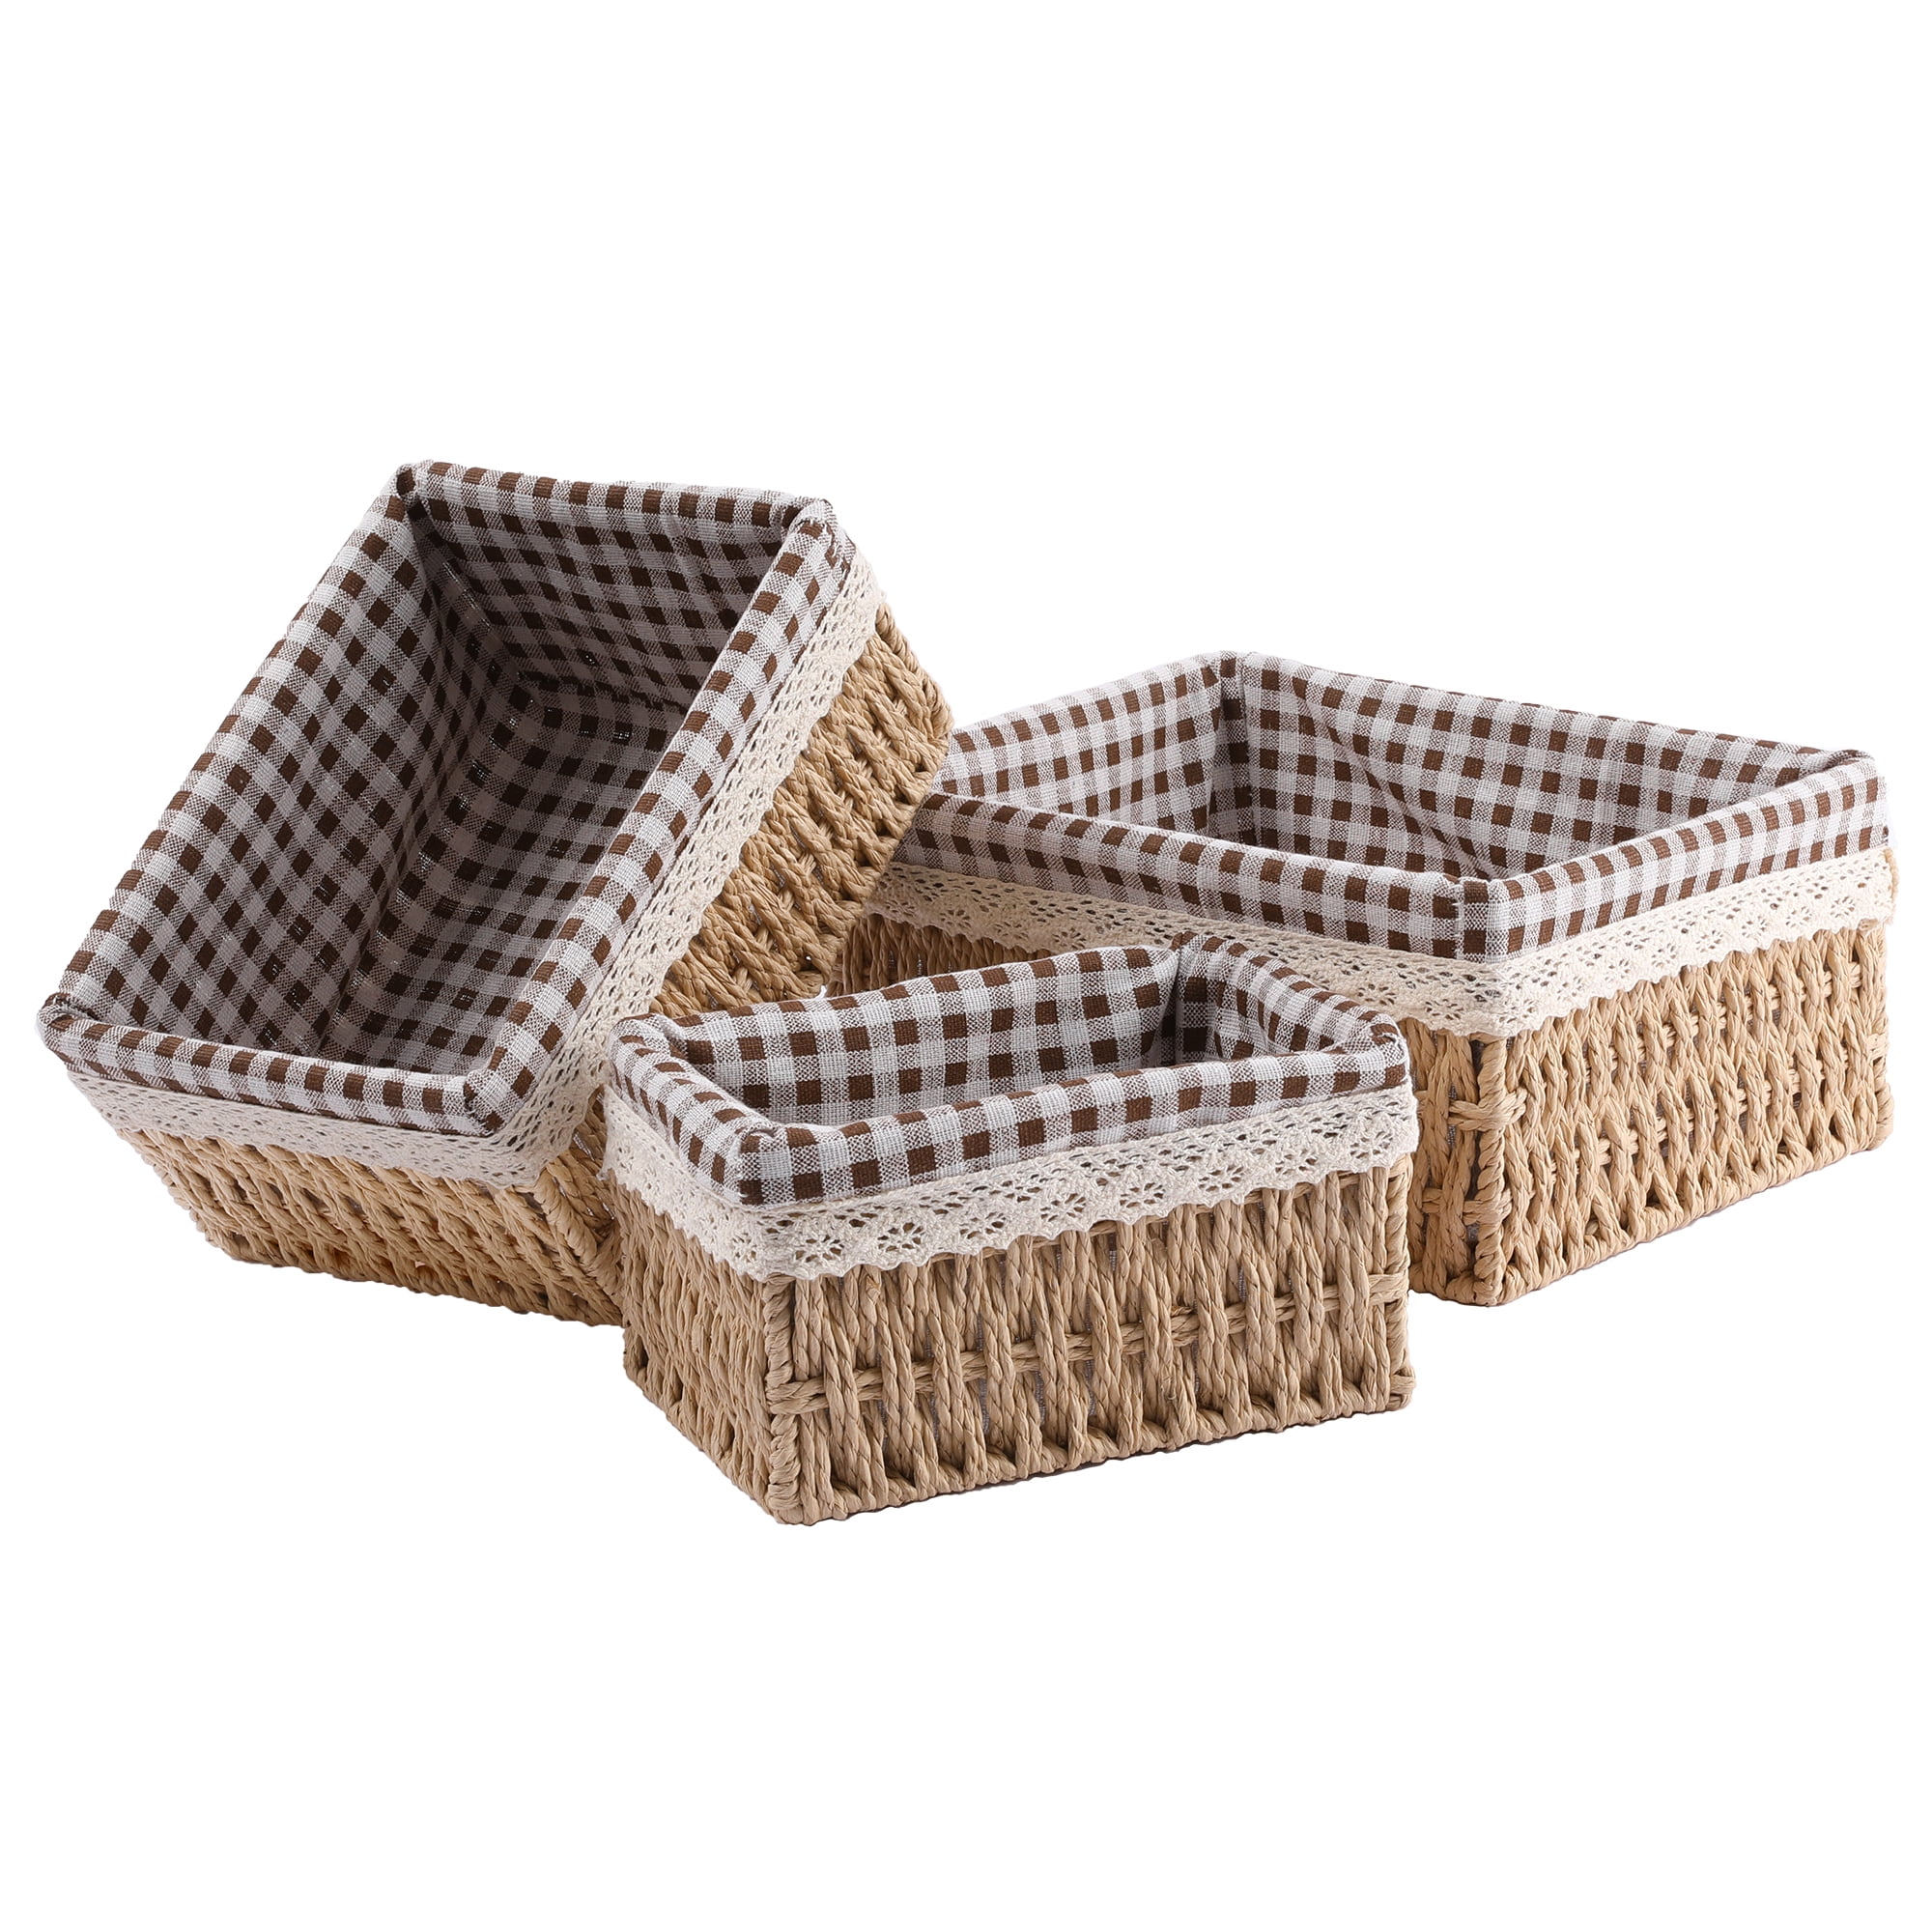 Black X-Small Weave Basket Storage Container, 2.4 x 7.8 Inches